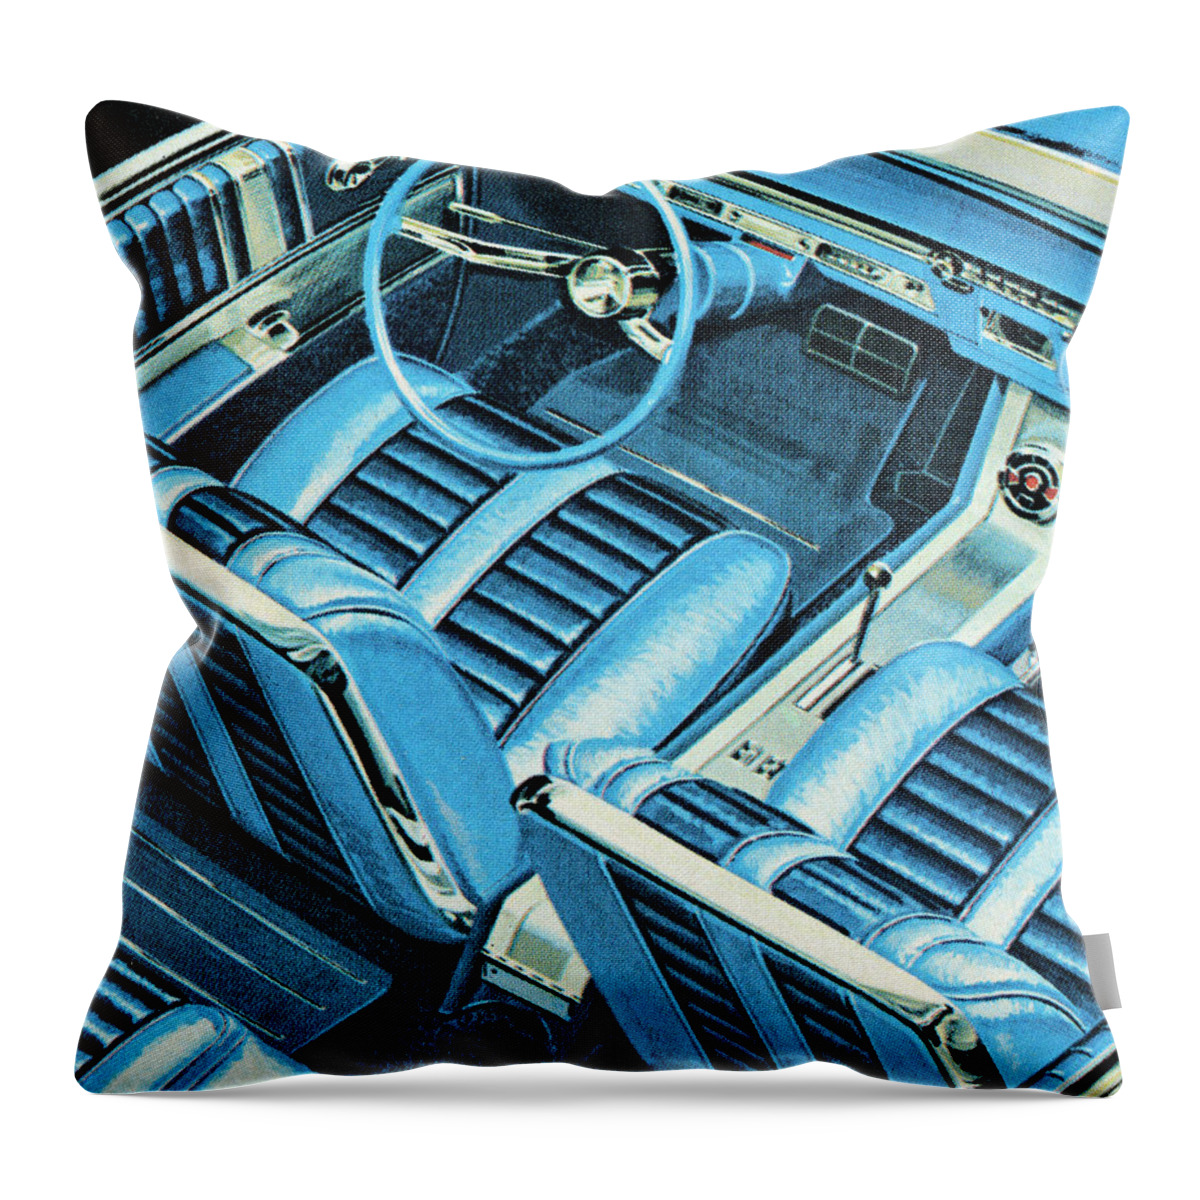 Auto Throw Pillow featuring the drawing Car Interior by CSA Images